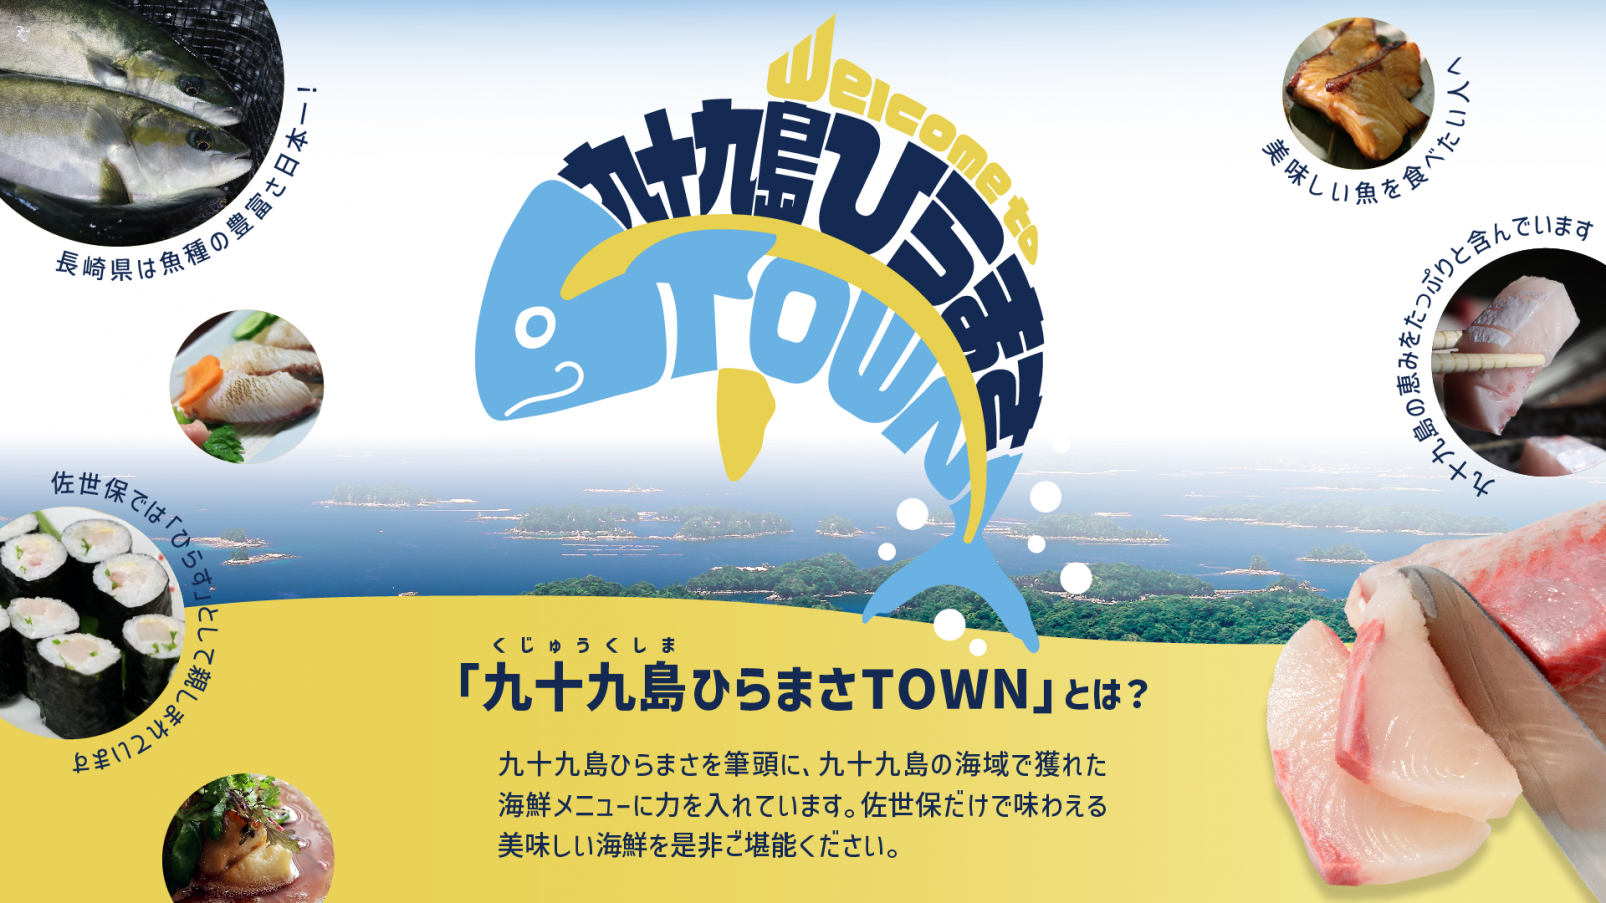 Welcome to 九十九島ひらまさTOWN！-1